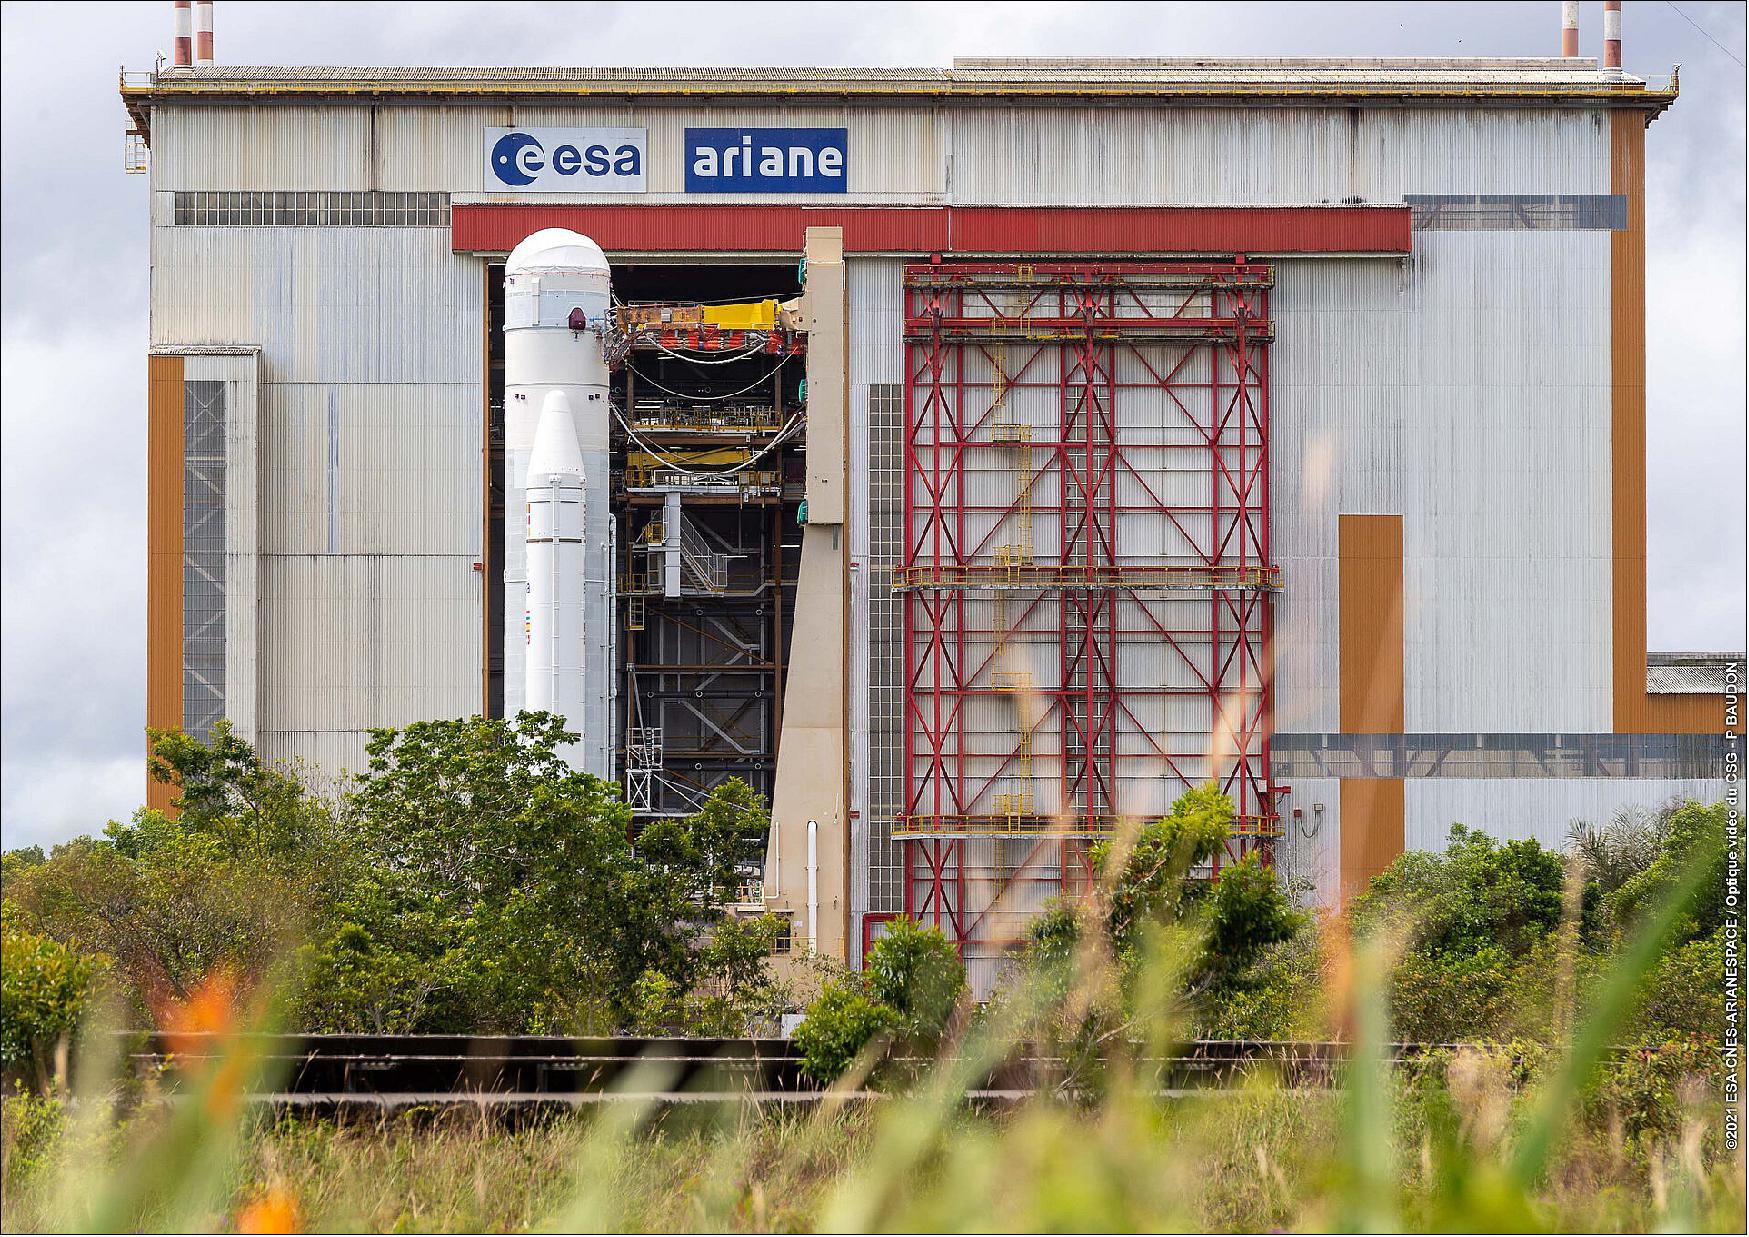 Figure 4: The Ariane 5 launch vehicle was moved to the final assembly building at Europe's Spaceport in French Guiana on 29 November 2021 (image credit: ESA/CNES/Arianespace)